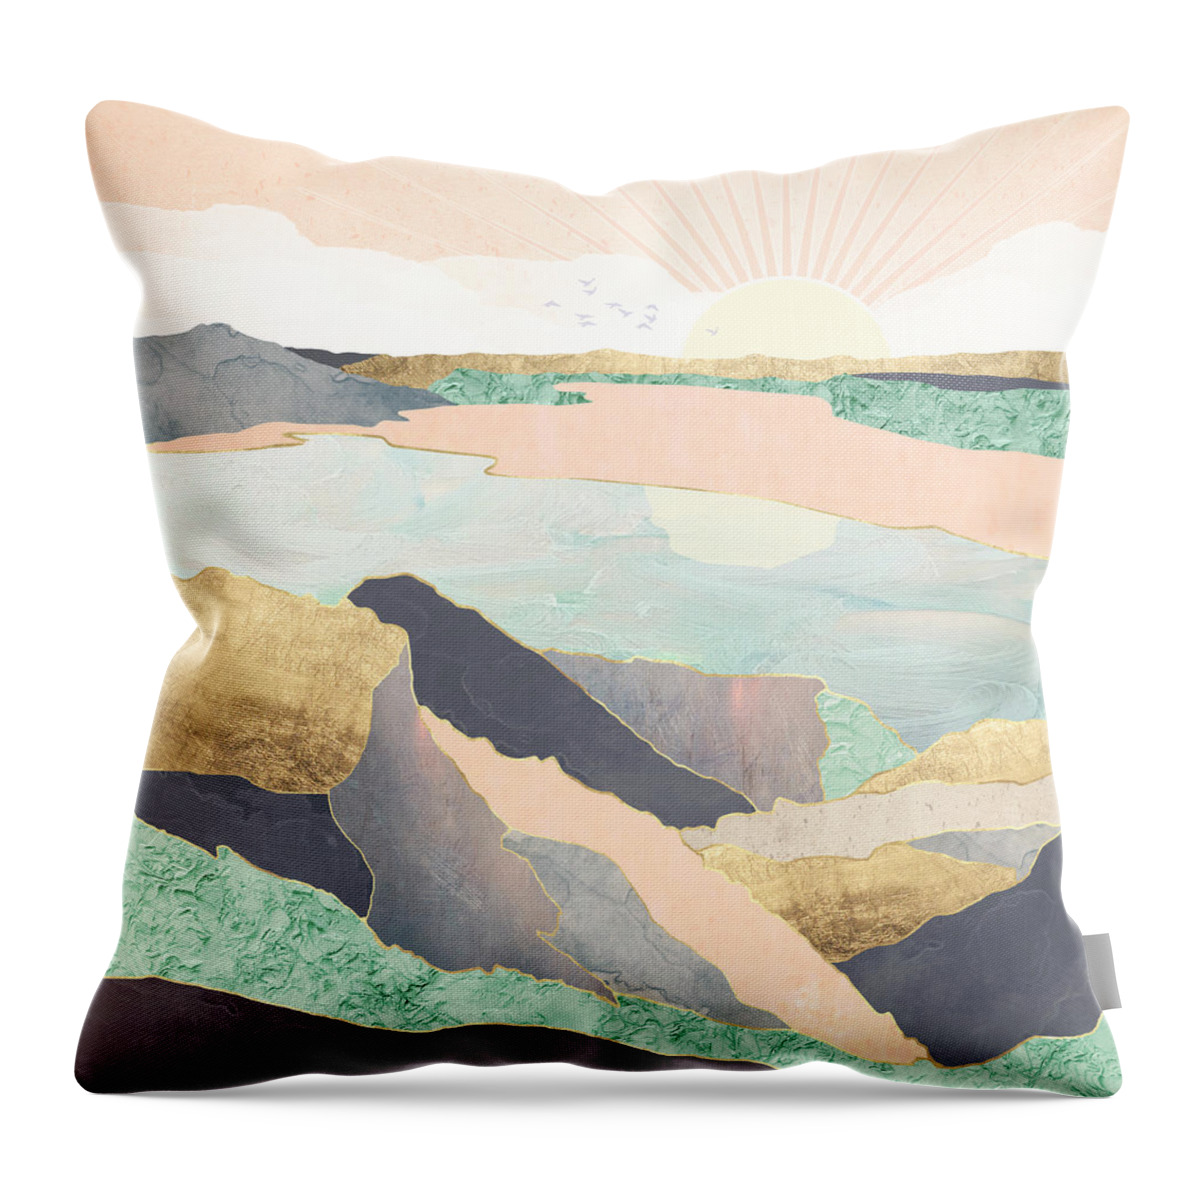 Sunrise Throw Pillow featuring the digital art Sunrise Beach by Spacefrog Designs